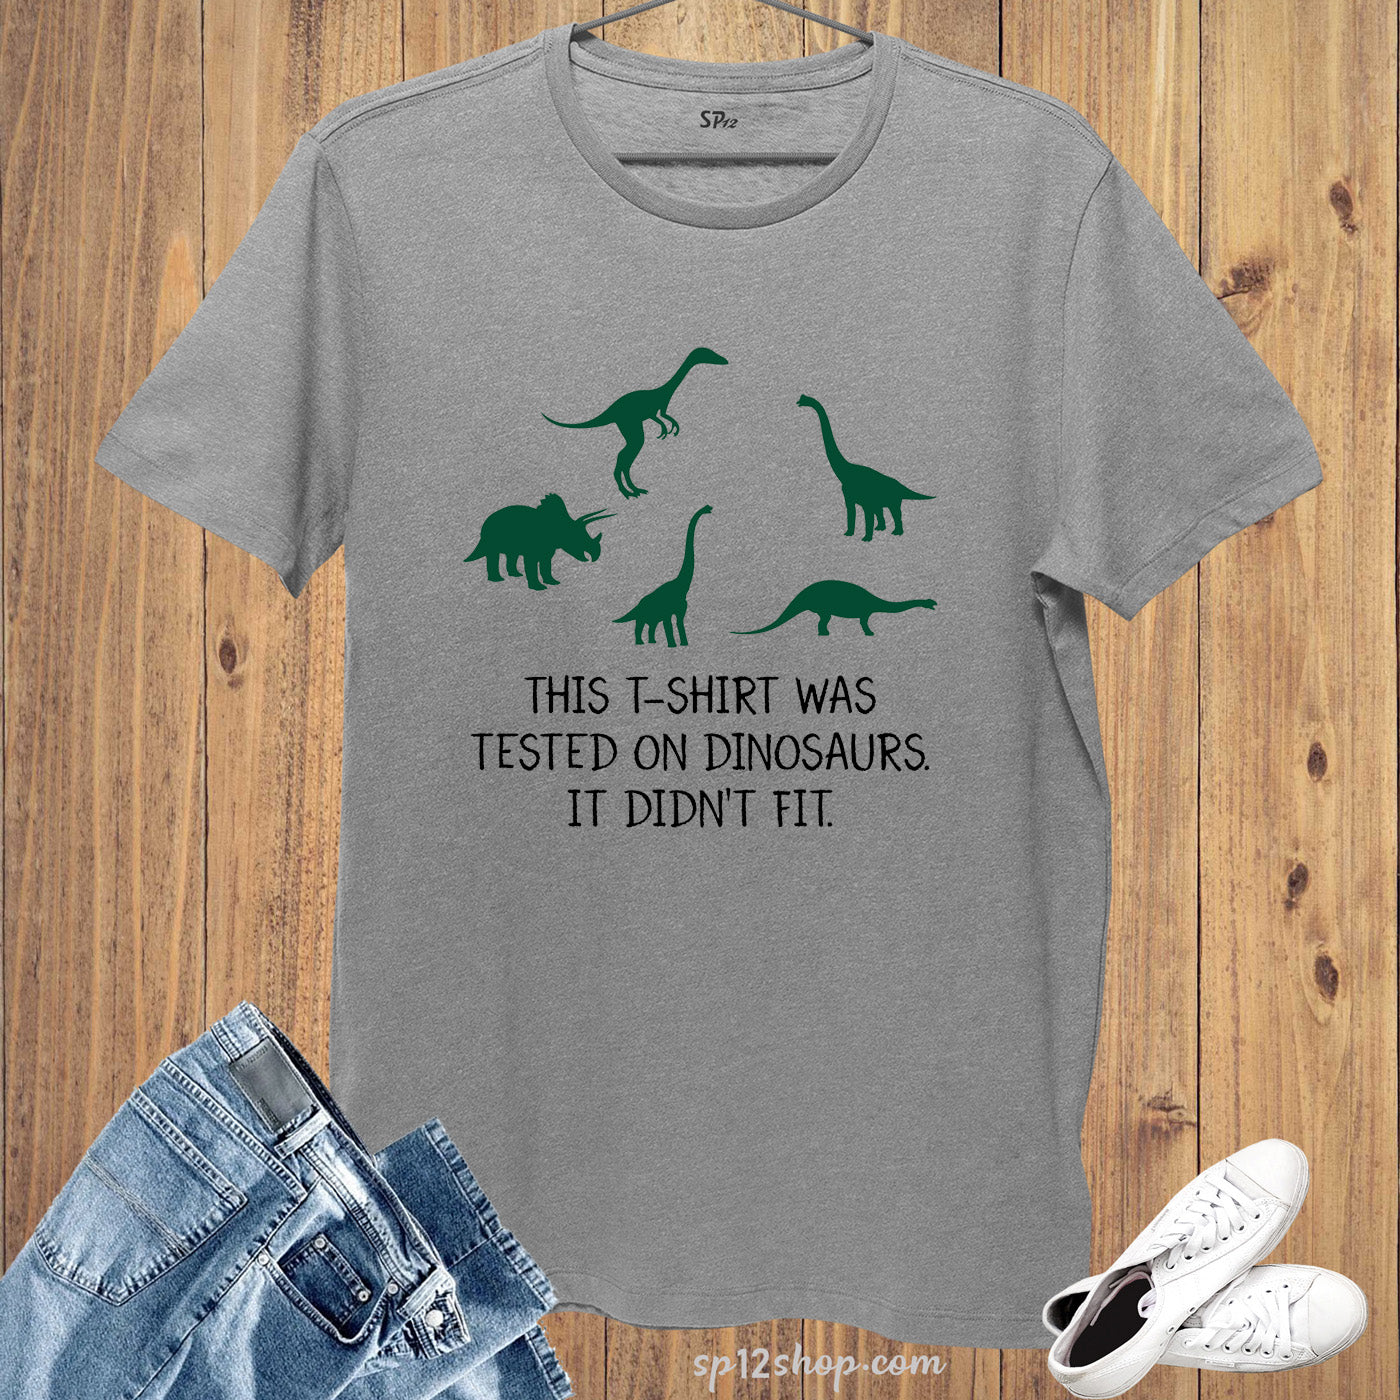 This t Shirt Was Tested On Dinosaur,It Didn't Fit T Shirt